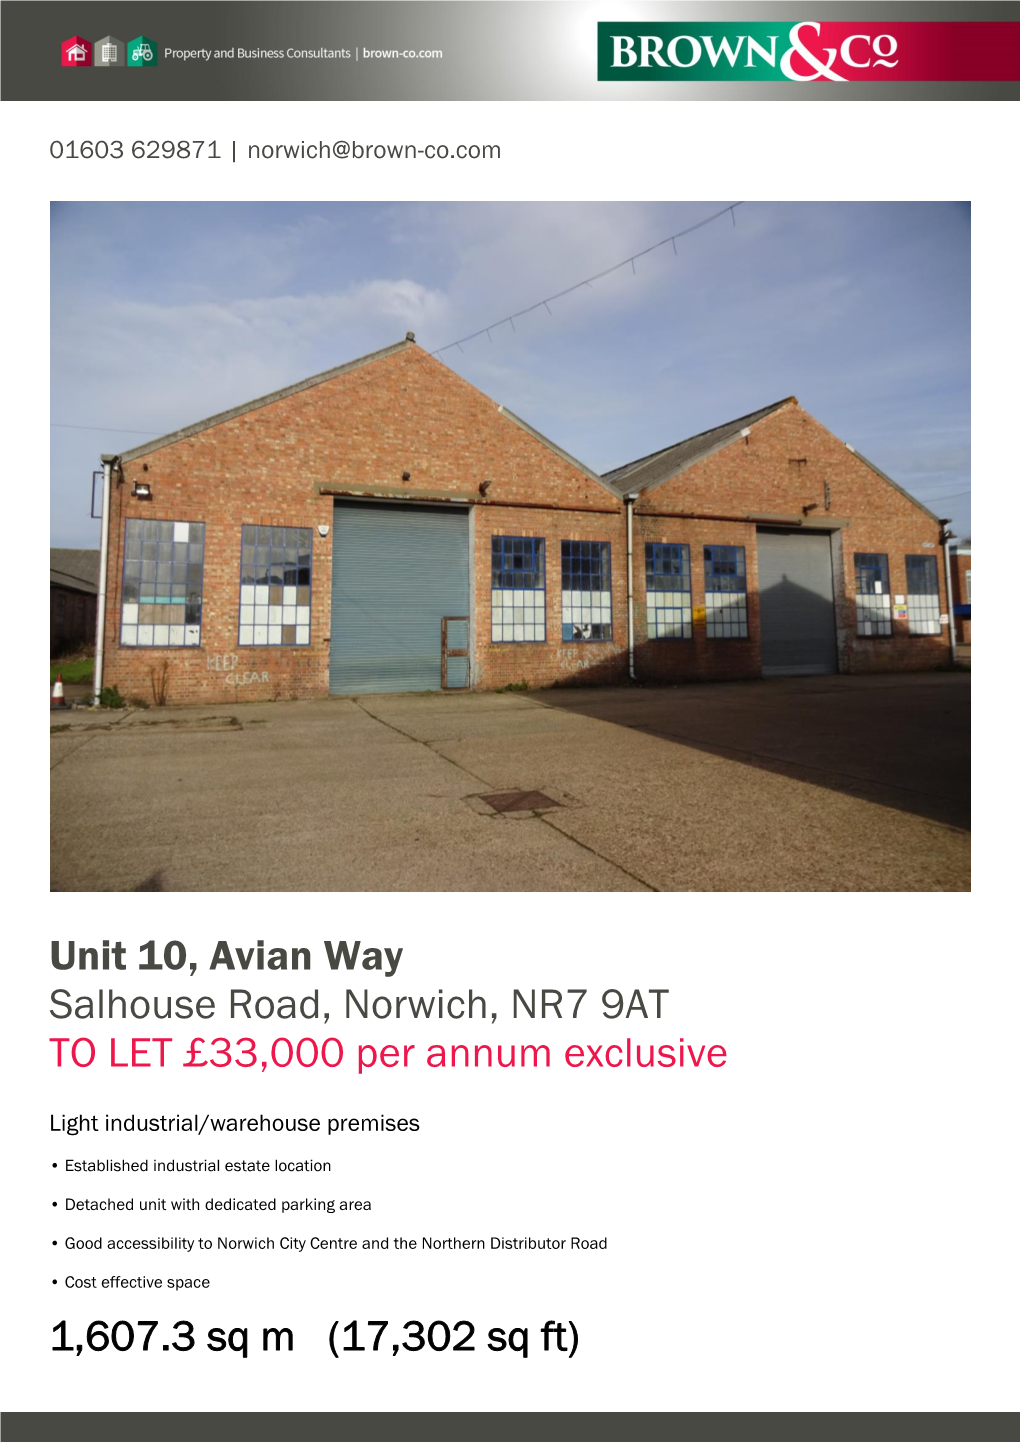 Unit 10, Avian Way Salhouse Road, Norwich, NR7 9AT to LET £33,000 Per Annum Exclusive